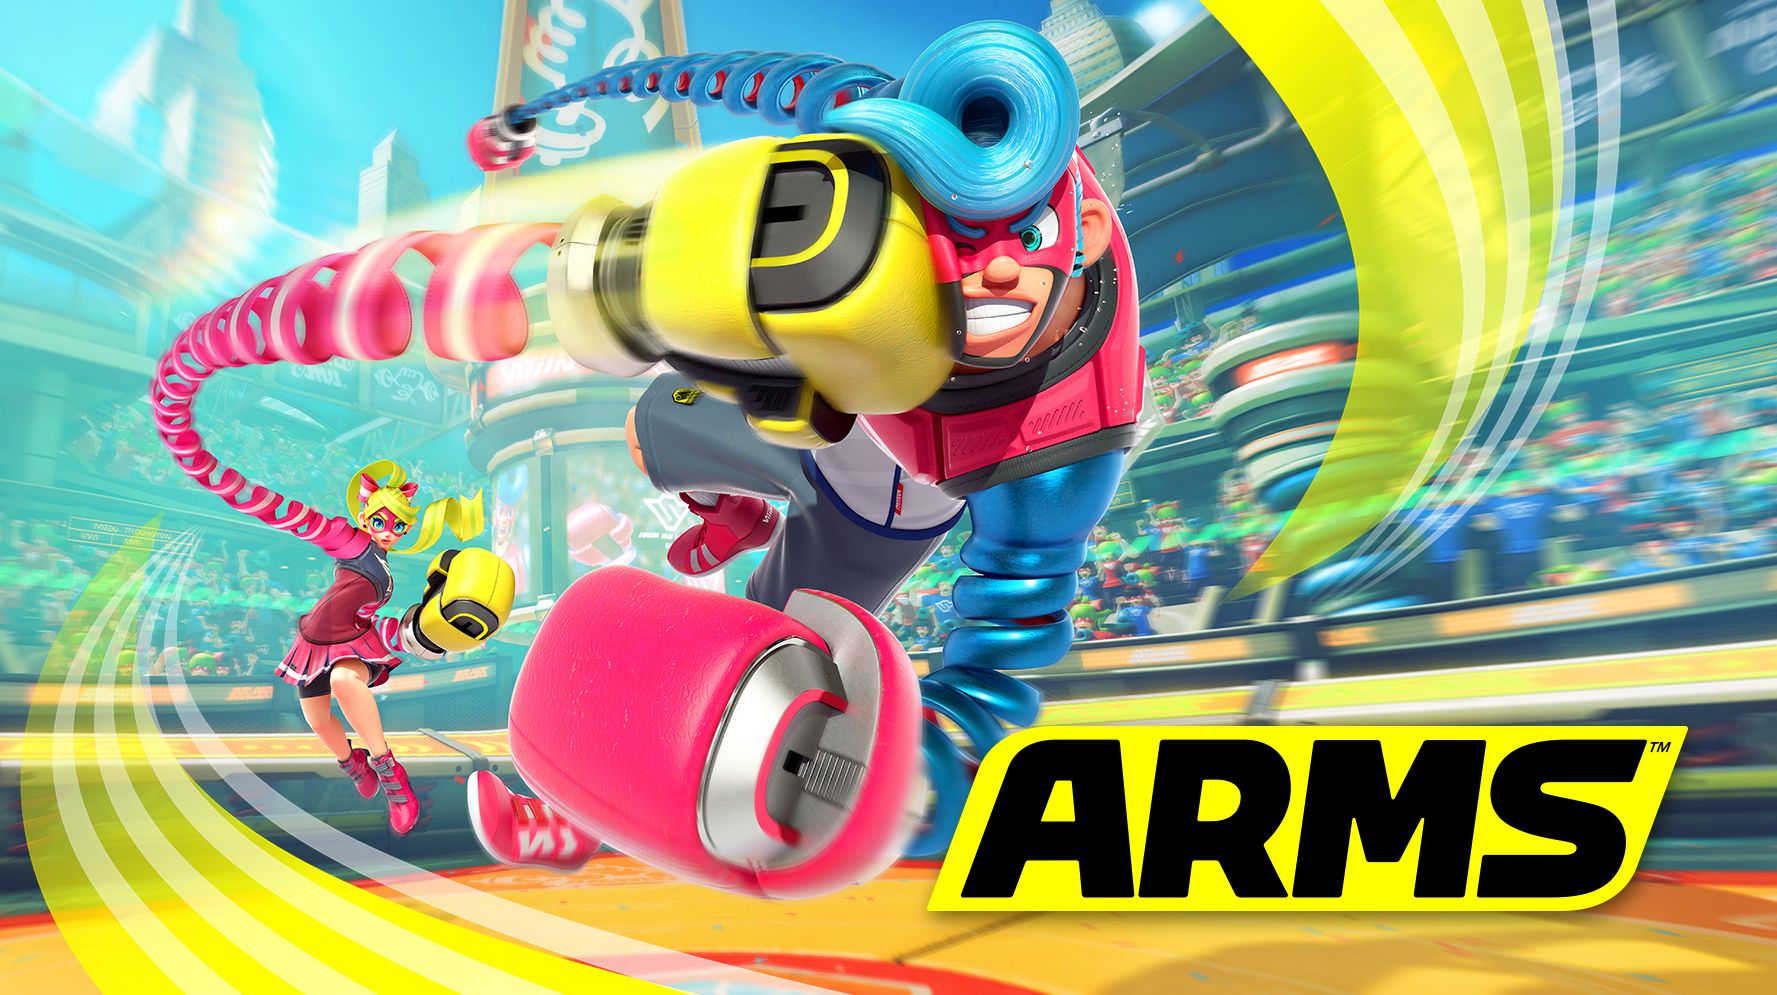 Review game ARMS: the most unusual fighting game of recent years